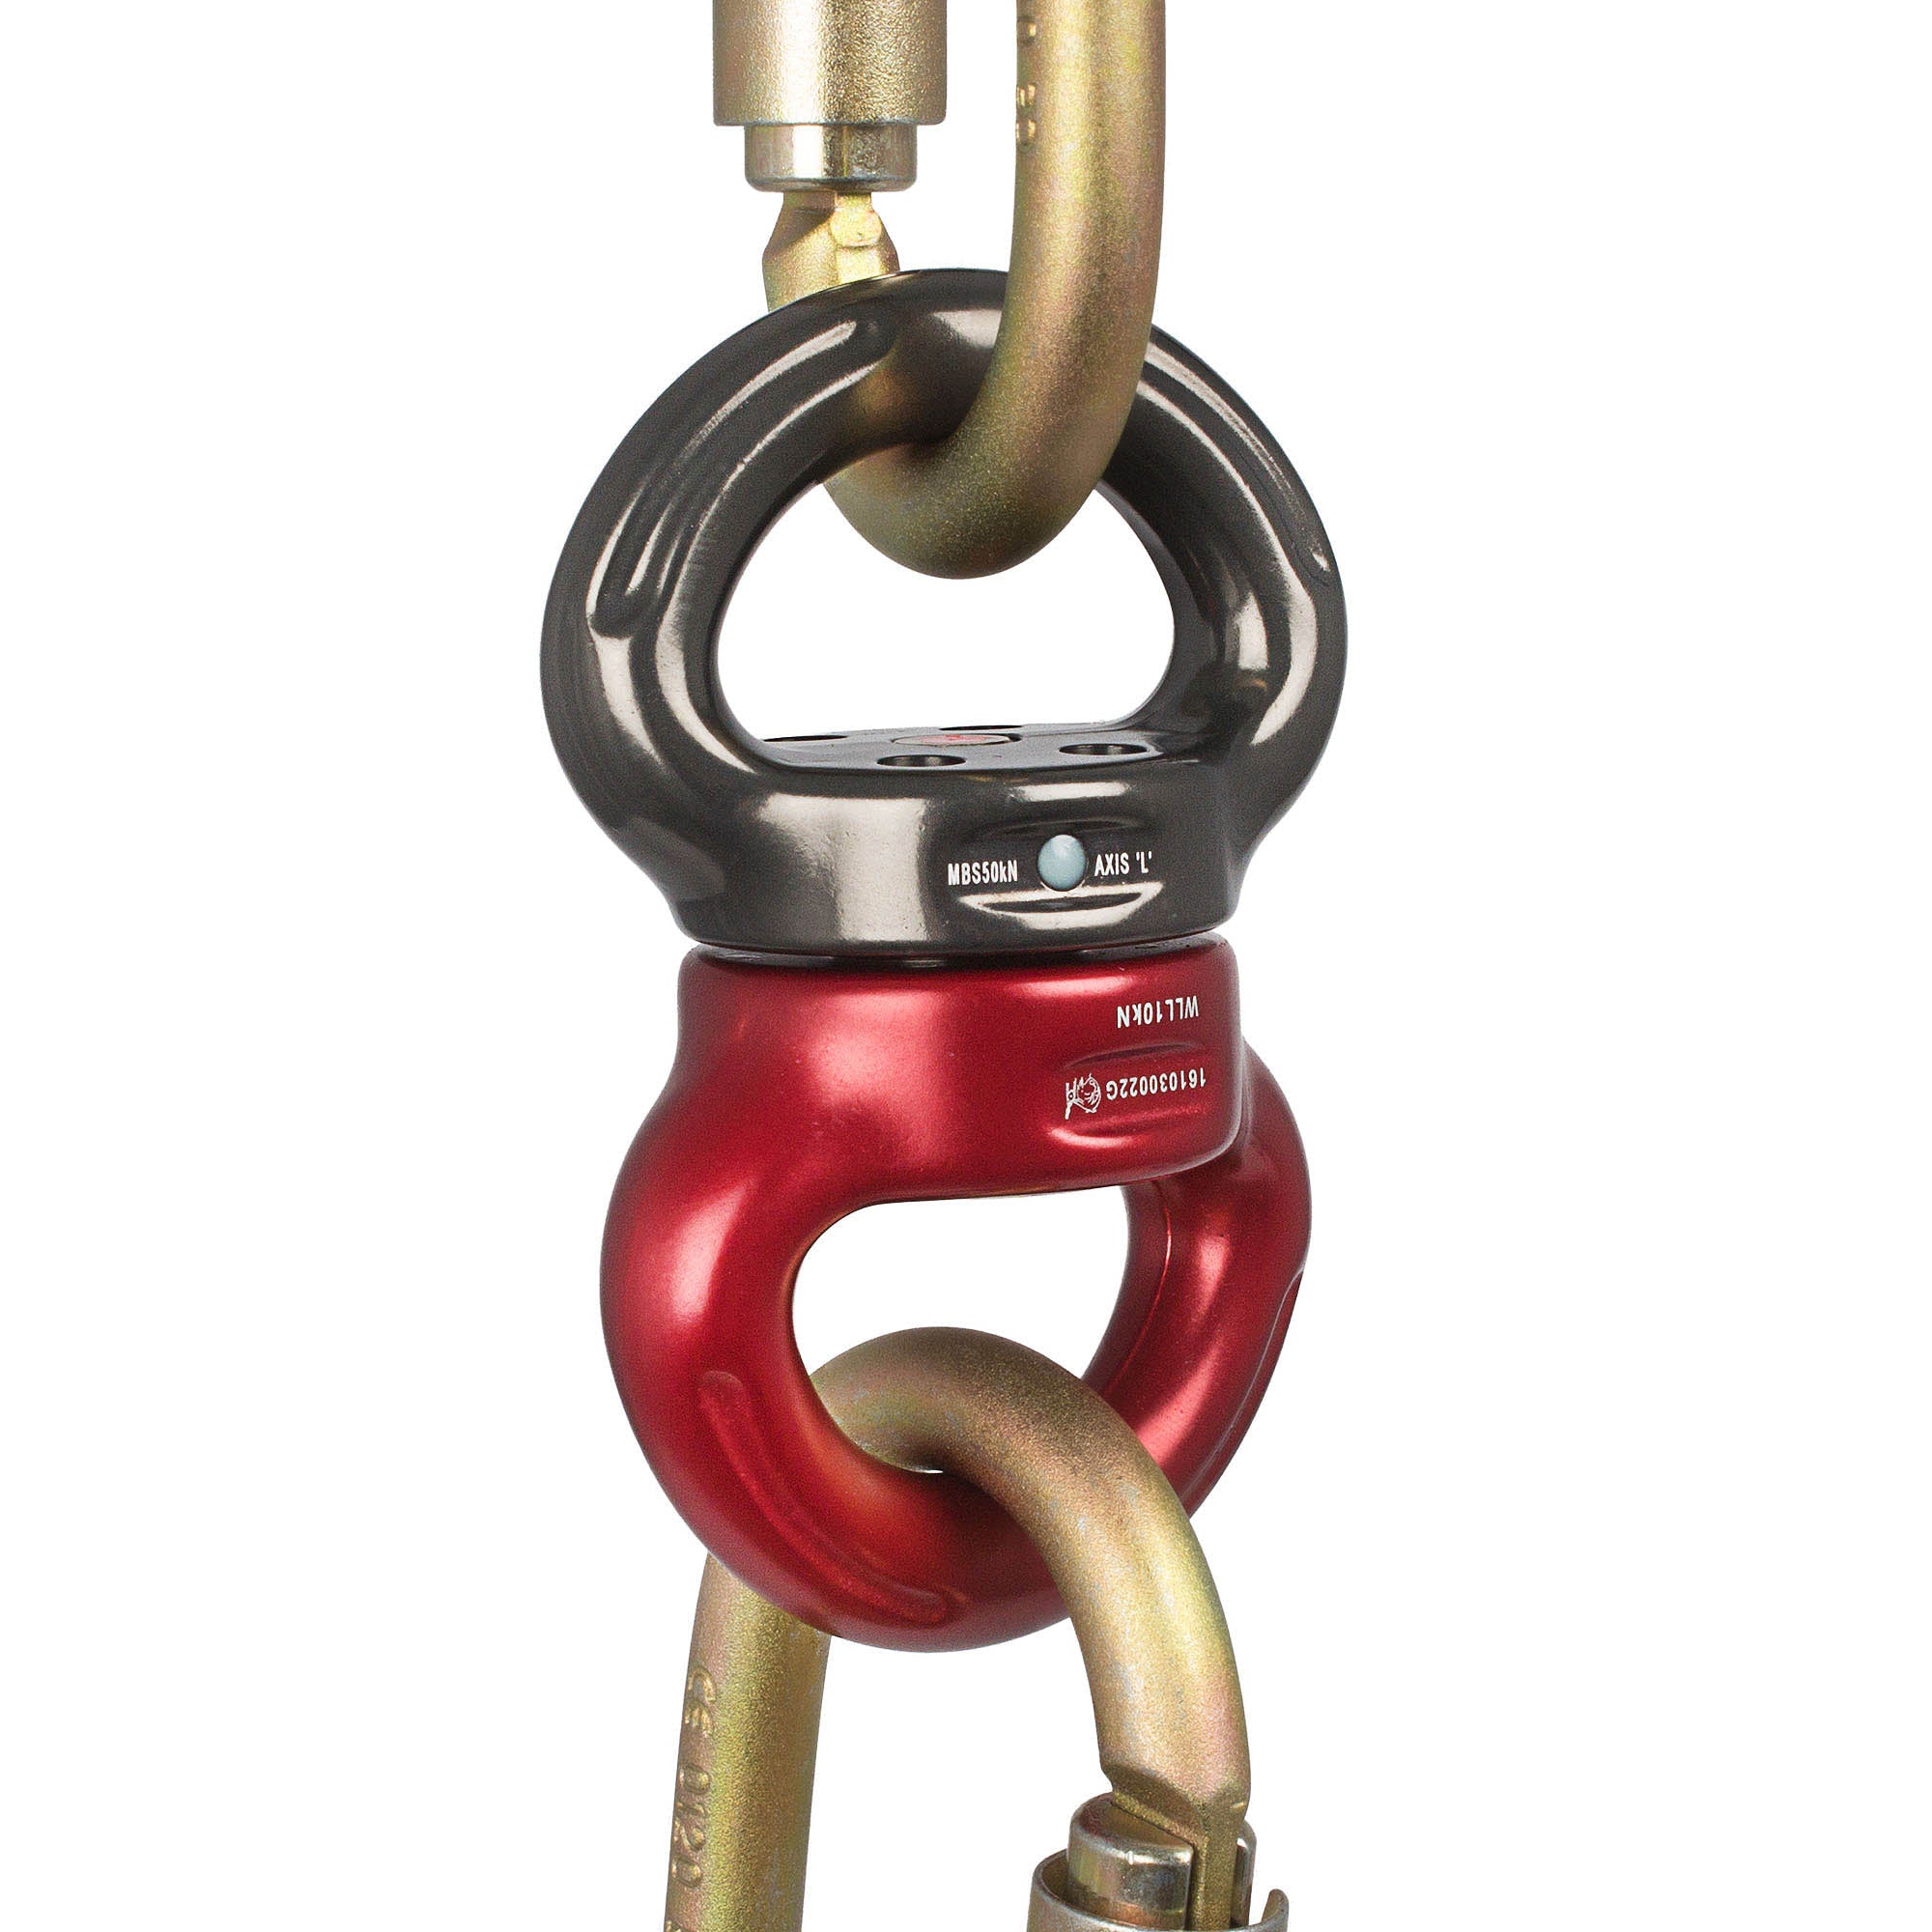 axis swivel connected to two carabiners